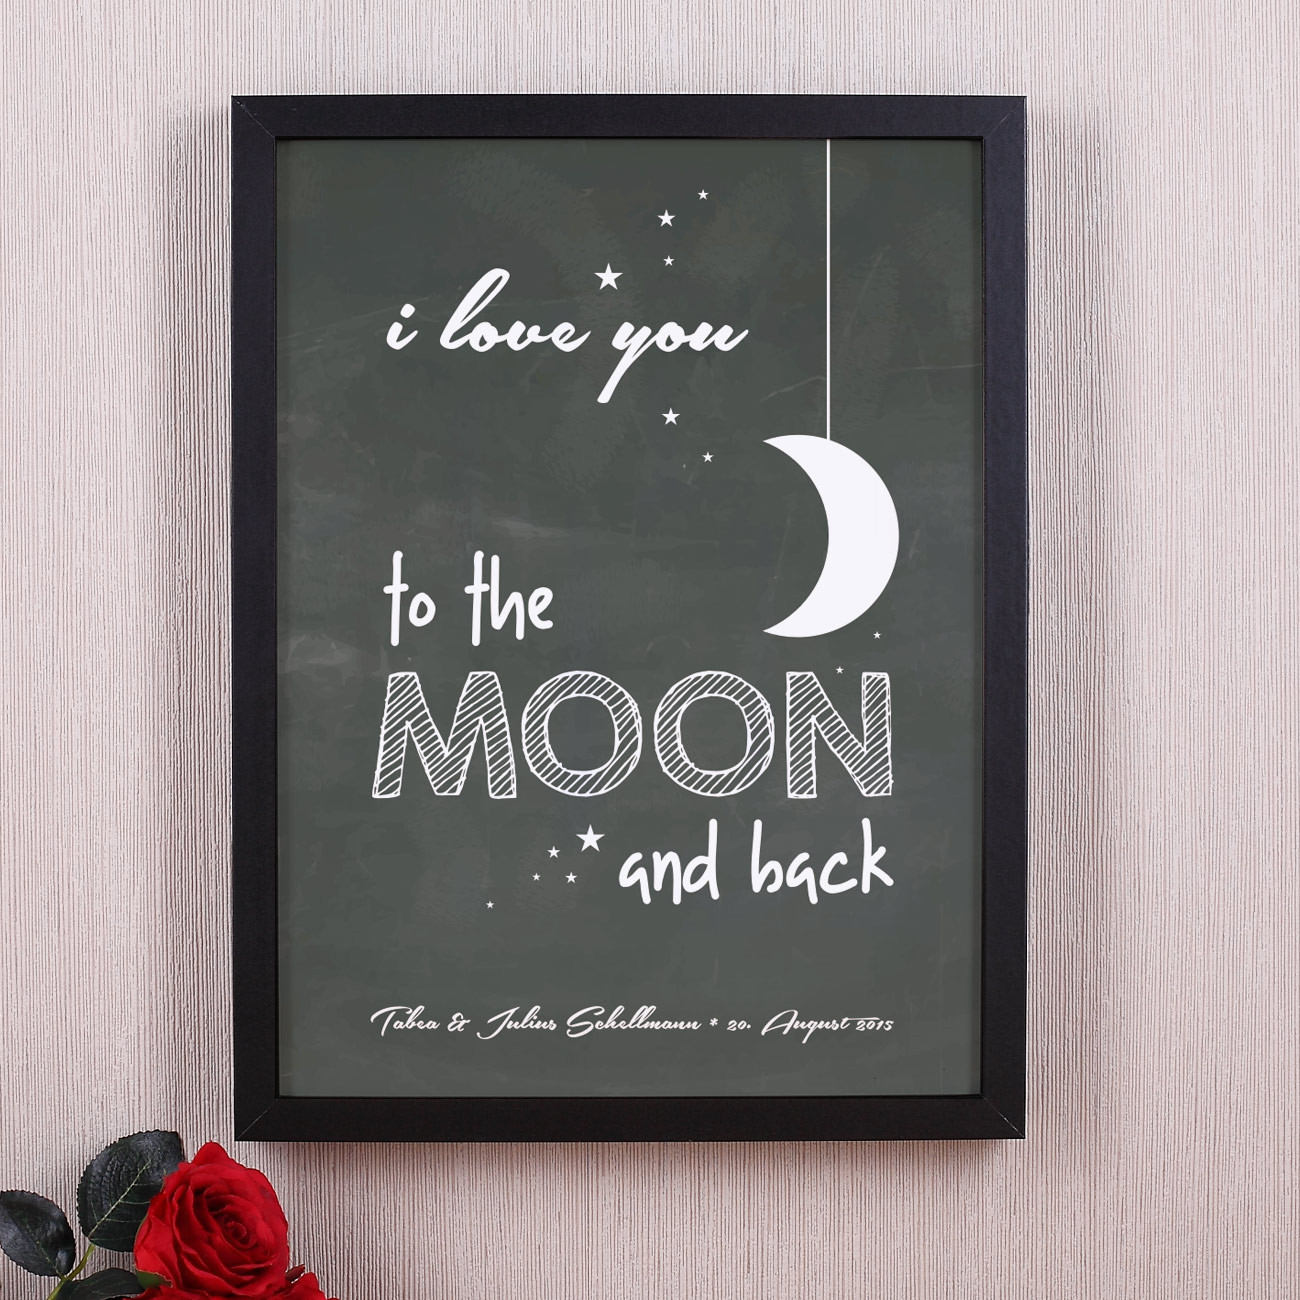 Geschenke Online 4 You
 i love you to the moon and back gerahmtes Poster mit